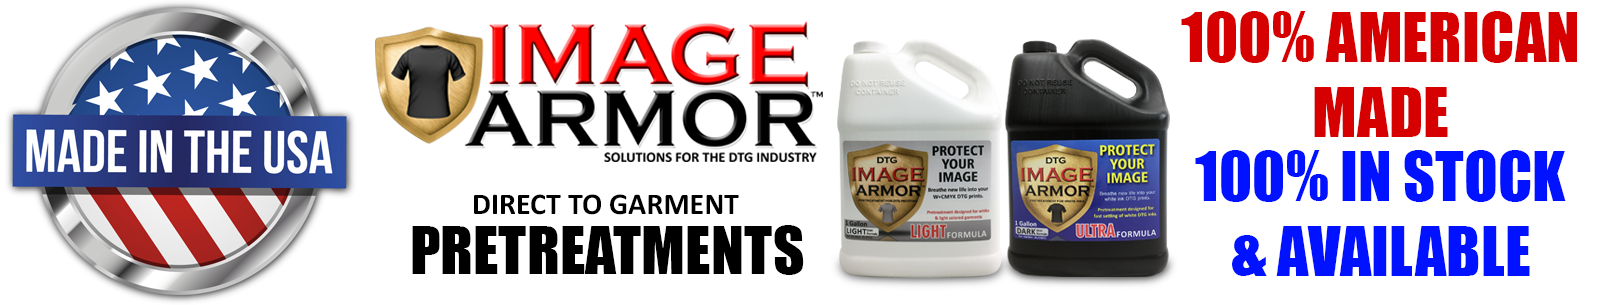 Image Armor Products are Made 100% in the USA